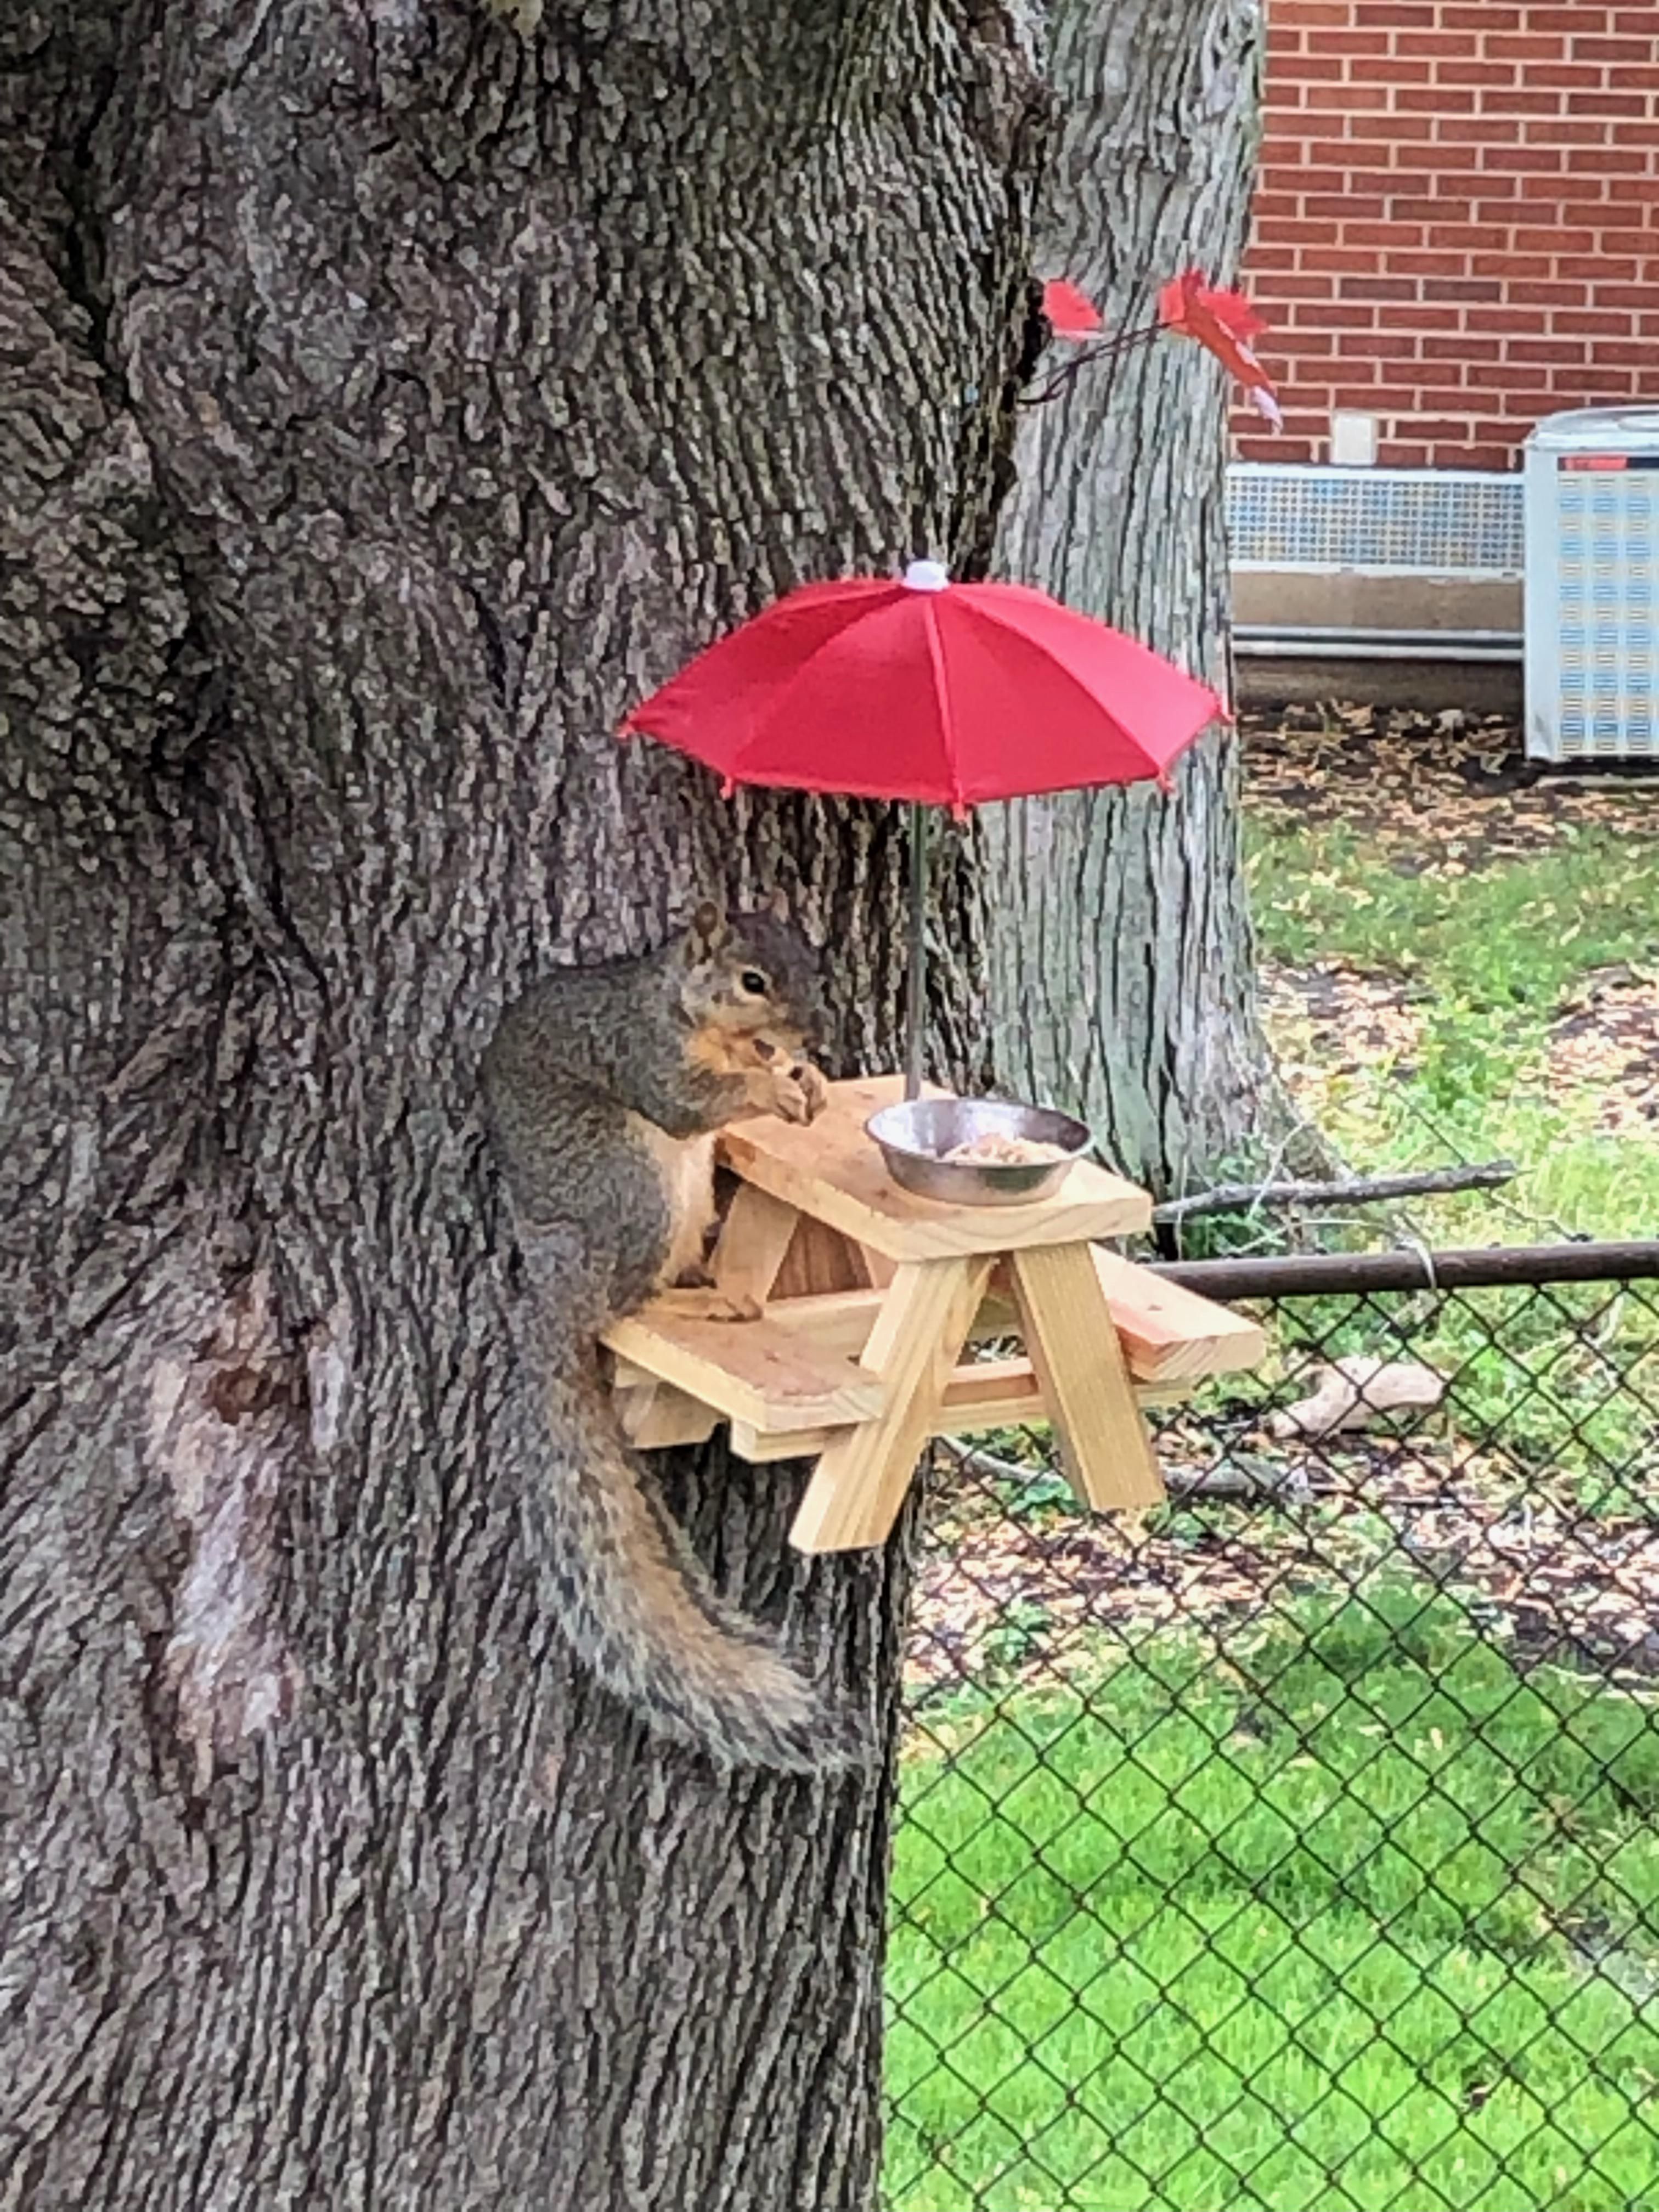 My mom loves feeding the squirrels. Upgraded from a charcuterie board to a full picnic table.